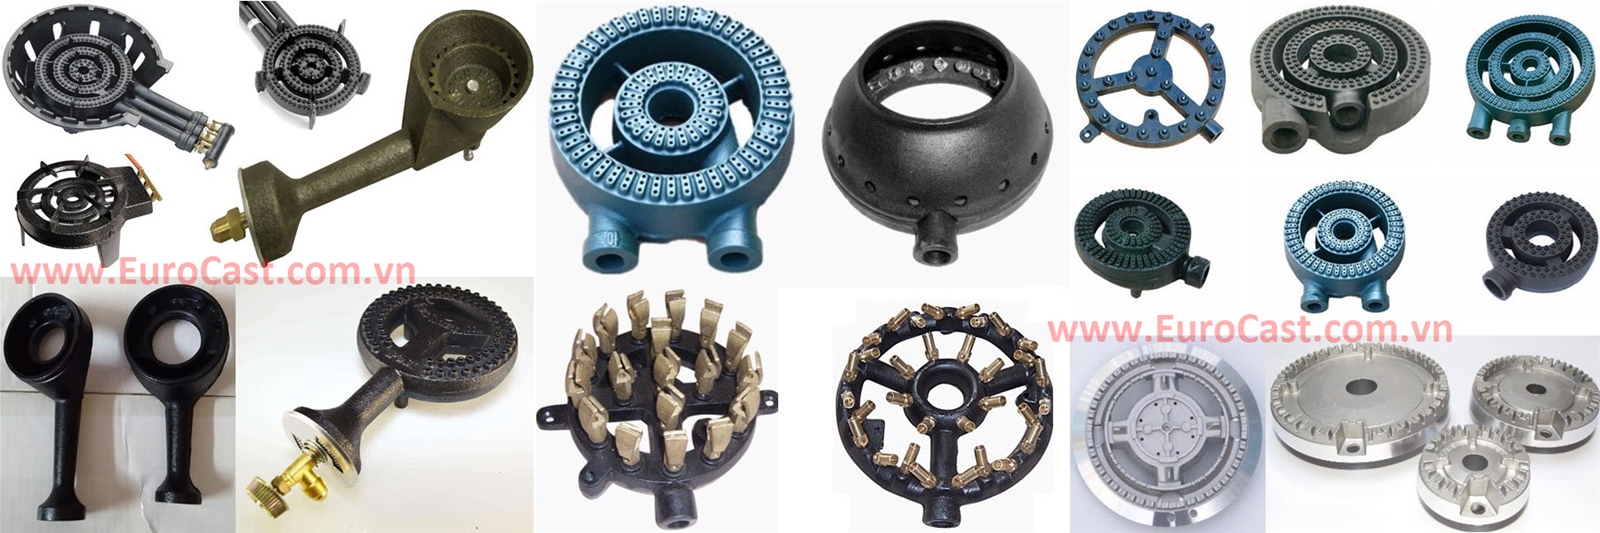 Gas cooker components by investment casting